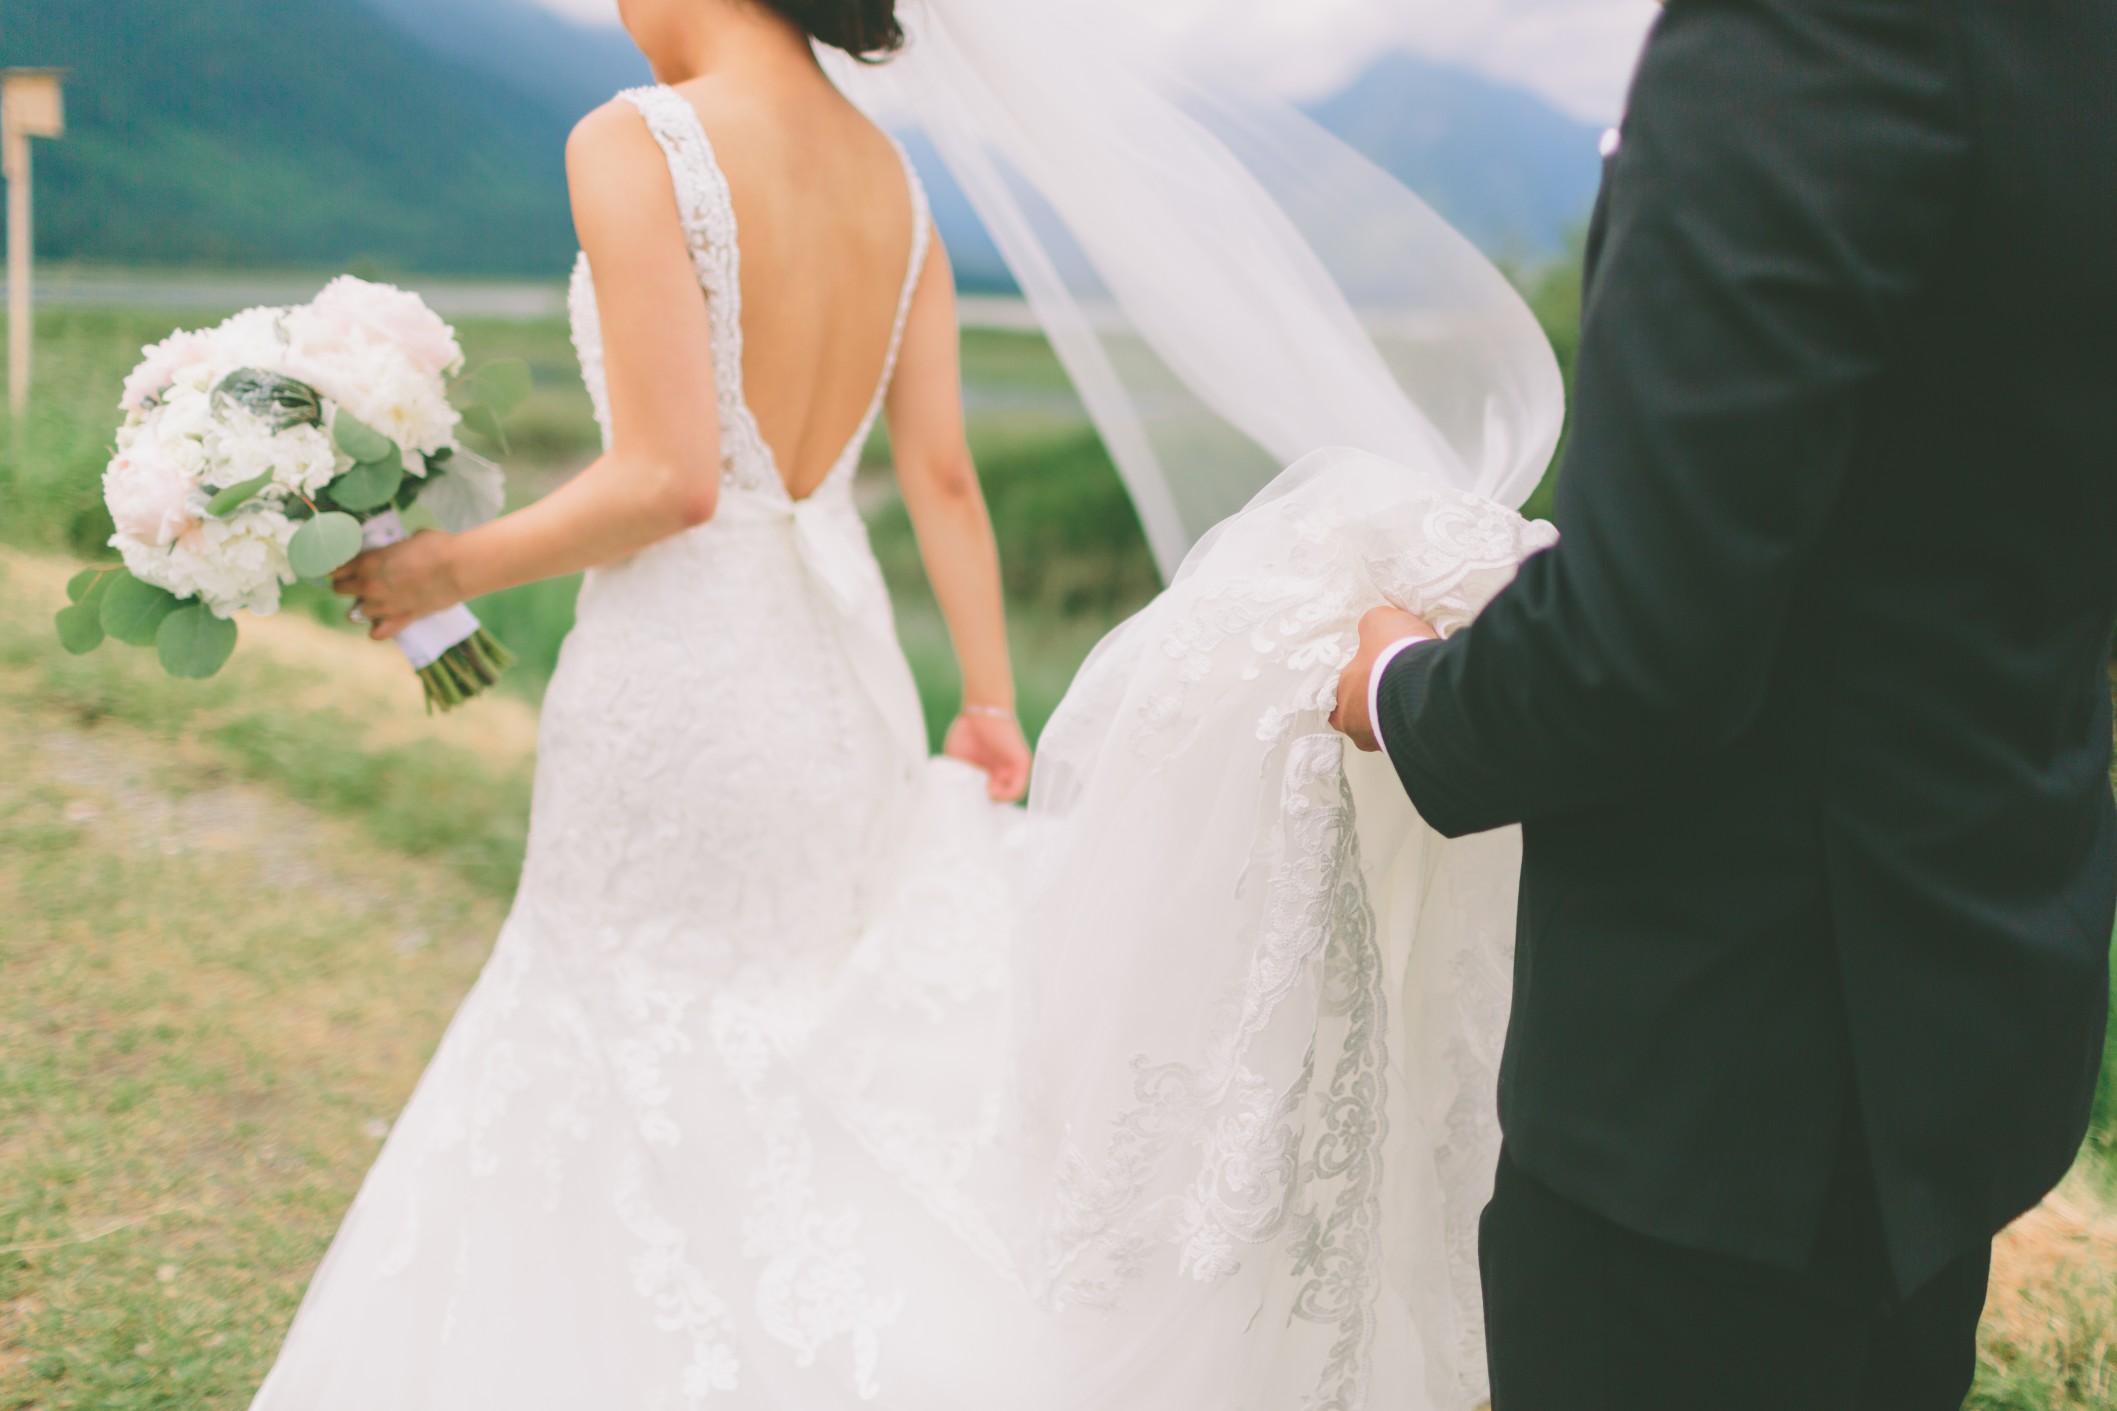 Why Do Wedding Dresses Have To Be White? - Ask Wedding Experience - Wedding -Experience